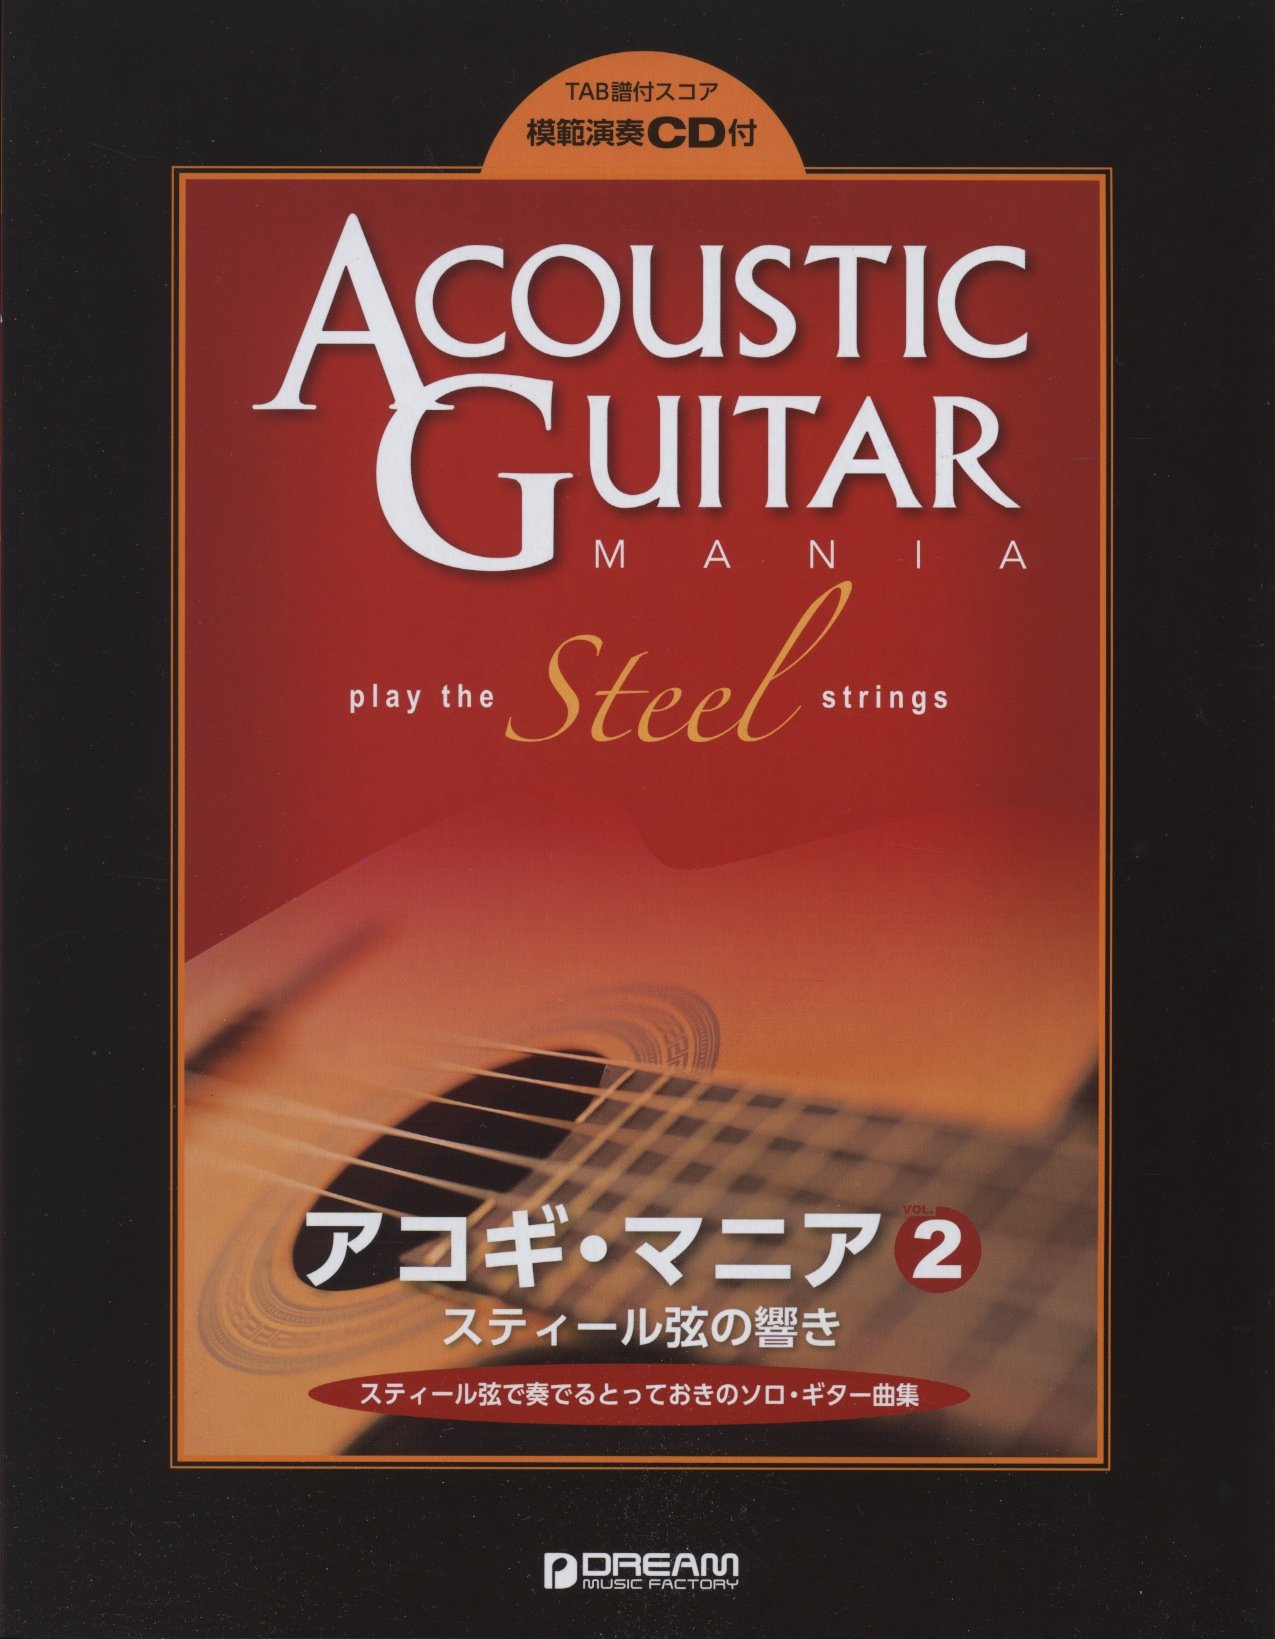 TAB. attaching score akogi mania (2) Steel string. .... musical performance CD attaching Steel string . play ...... Solo guitar collection 